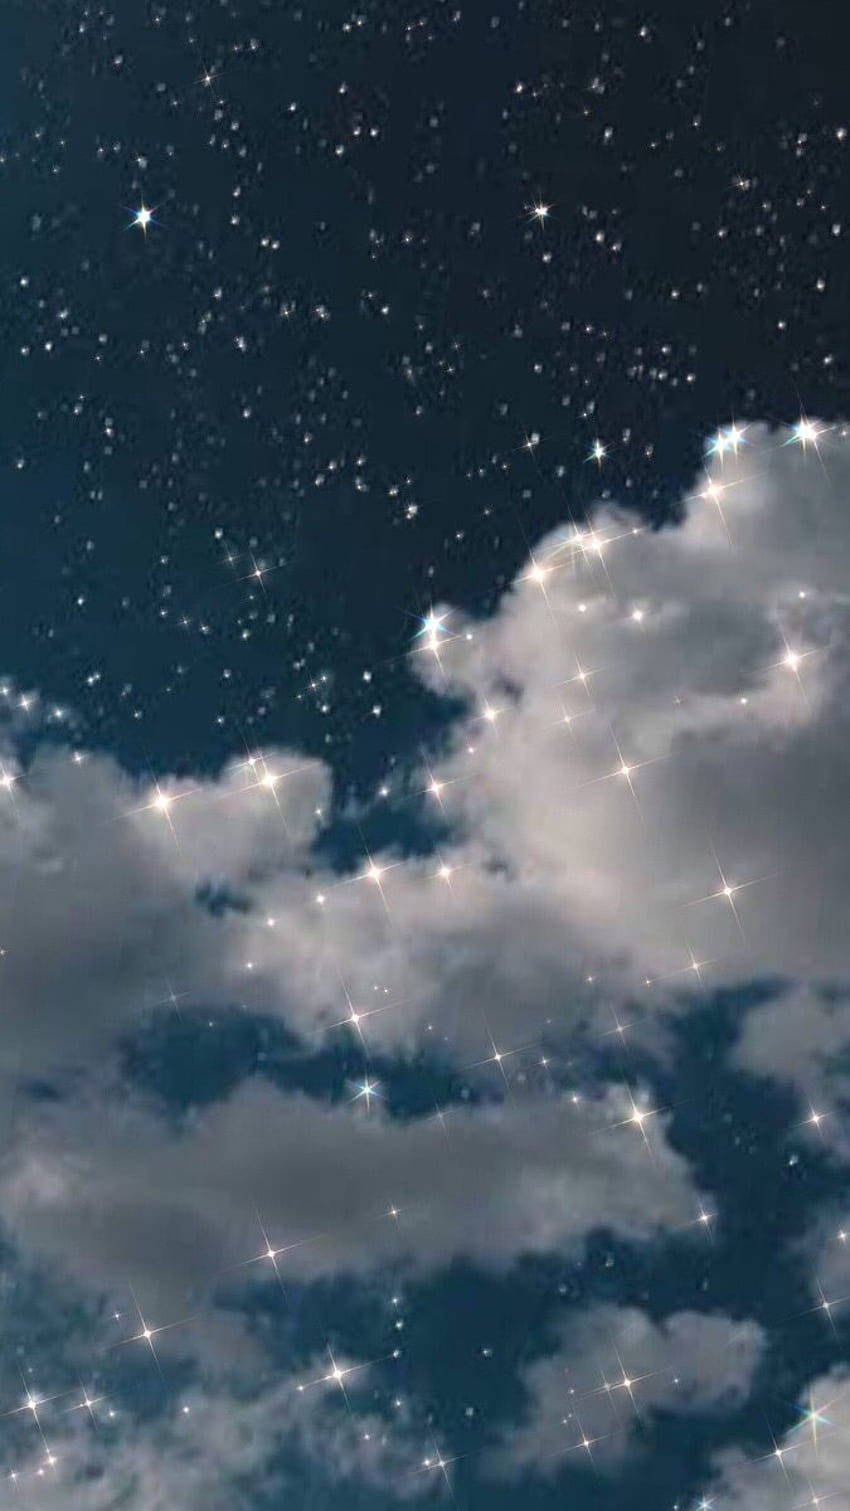 A dark blue sky with white clouds and stars - Vintage clouds